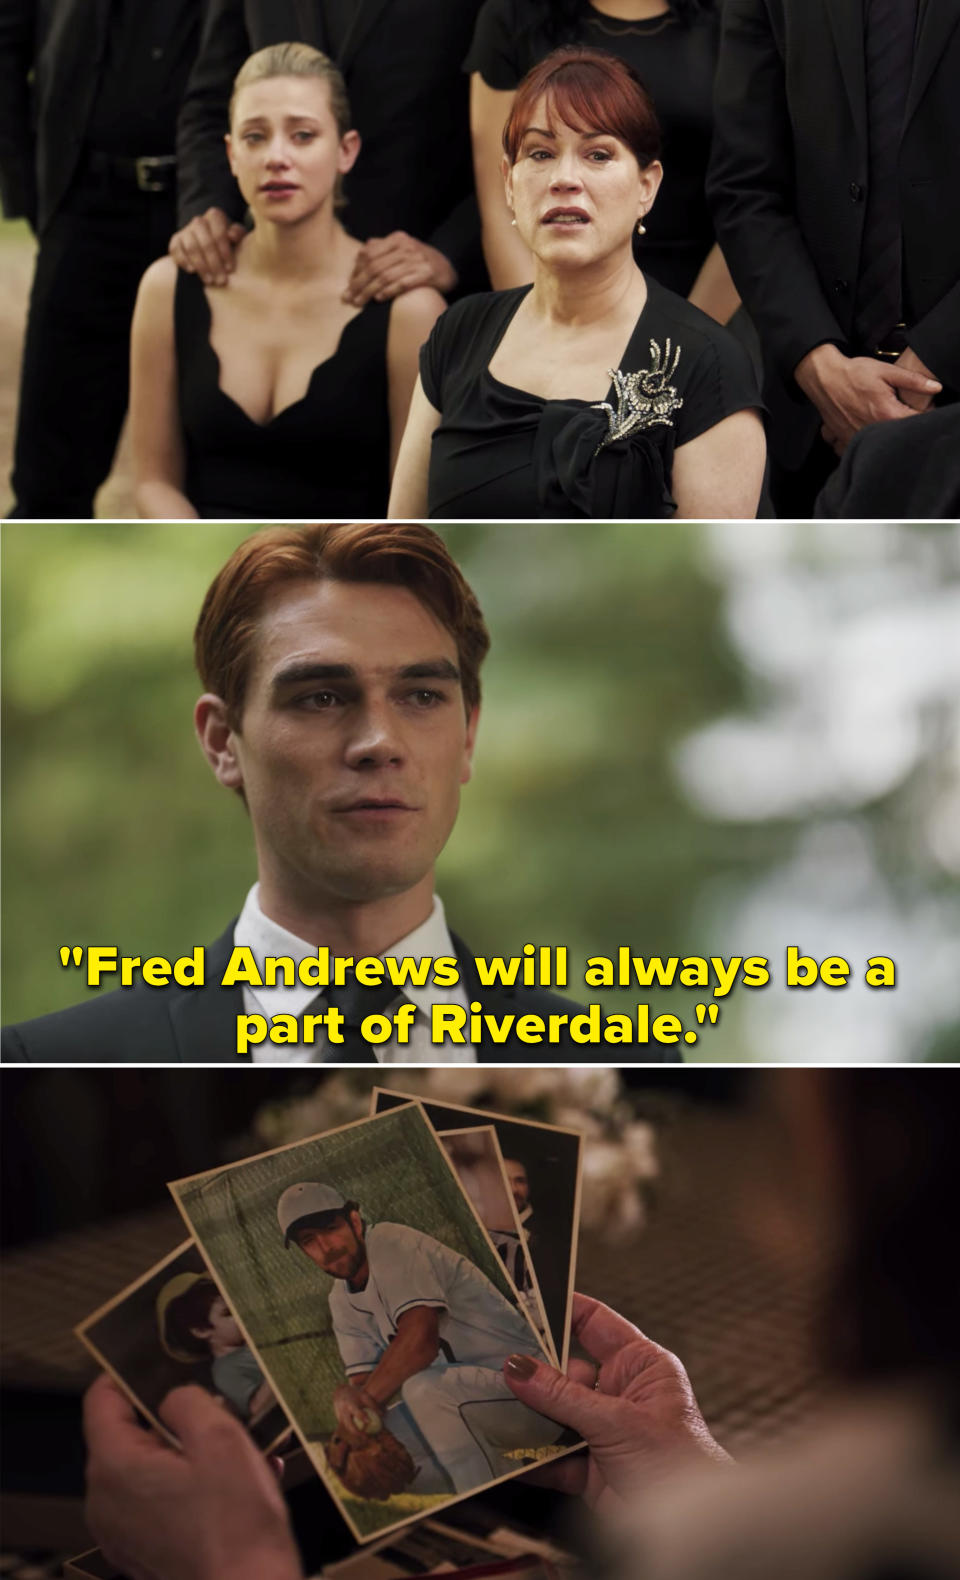 Archie saying, "Fred Andrews will always be a part of Riverdale"